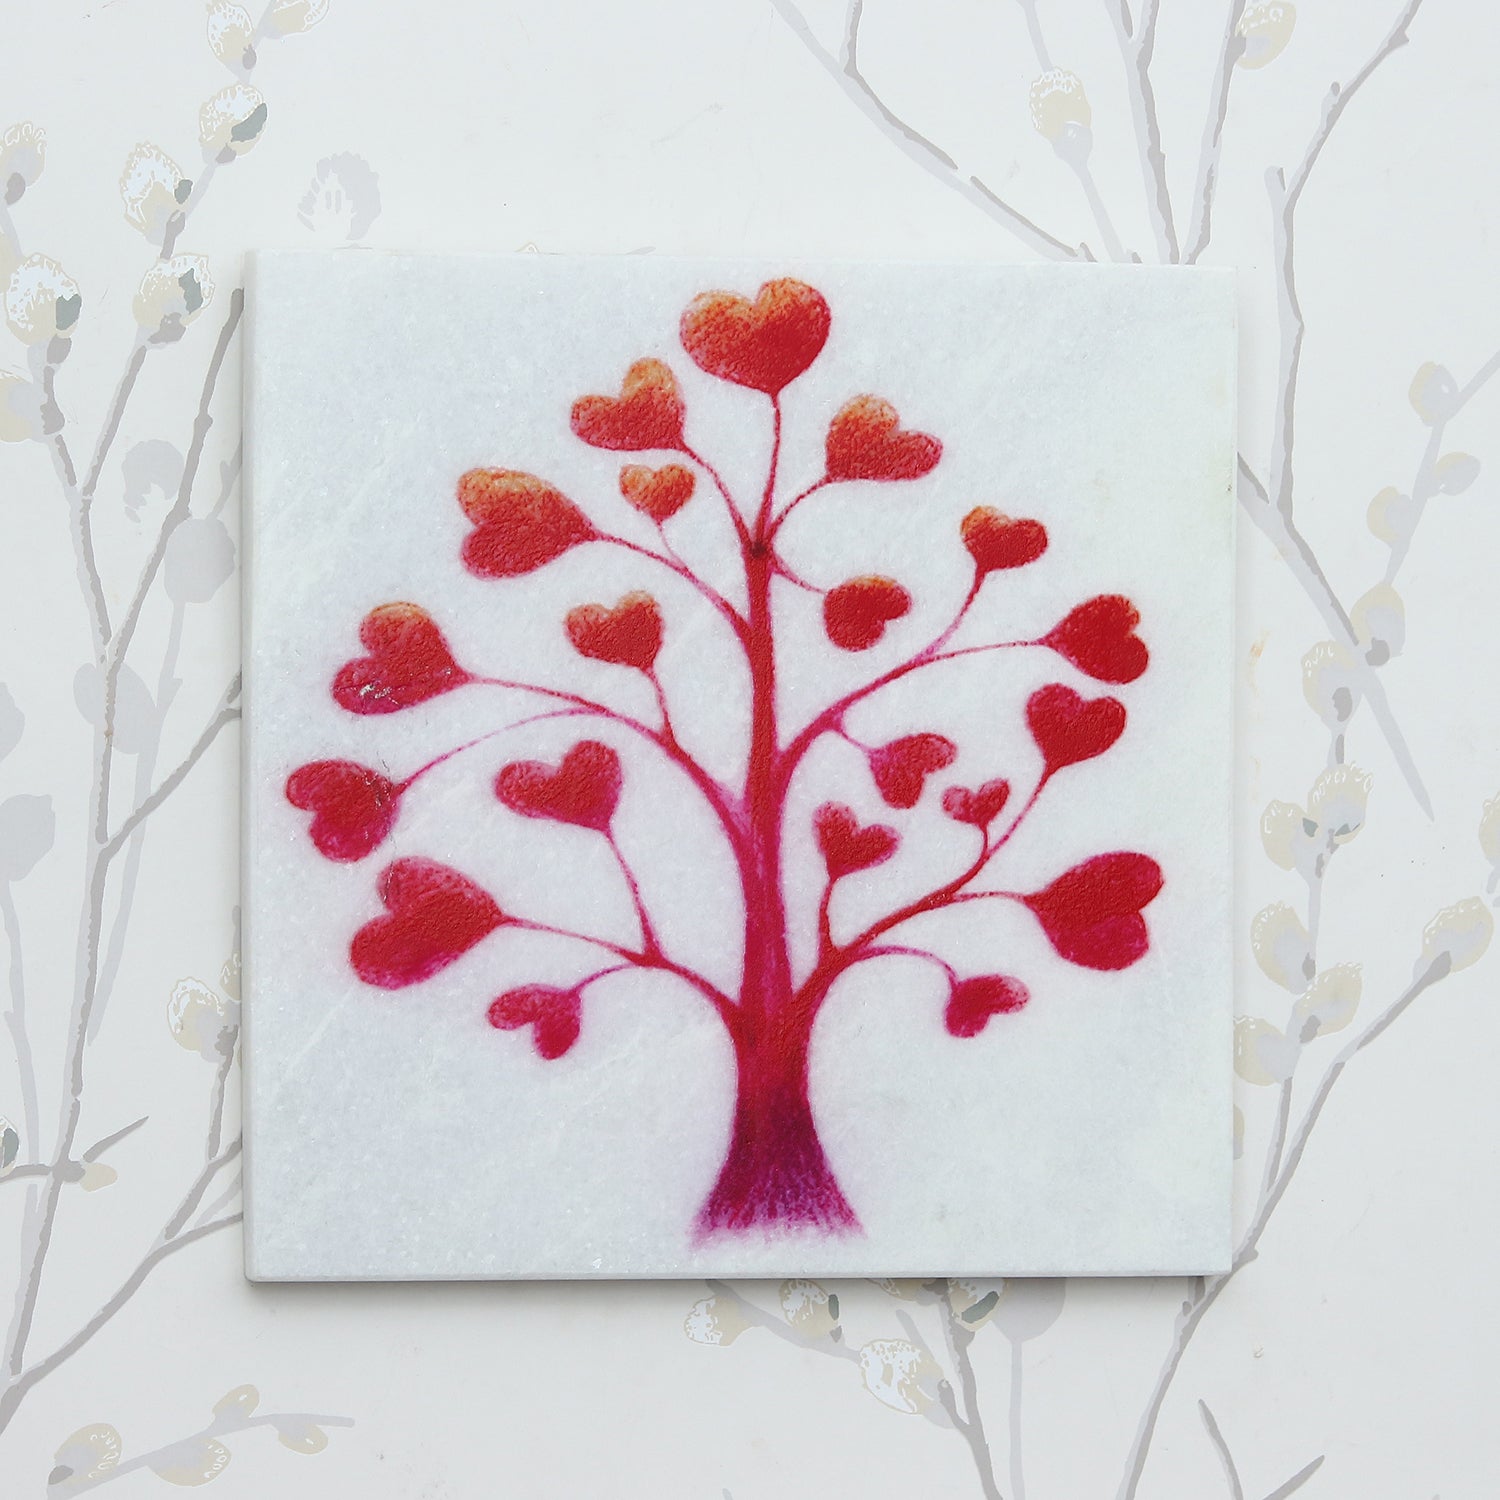 Red Hearts Tree Painting On Marble Square Tile 6